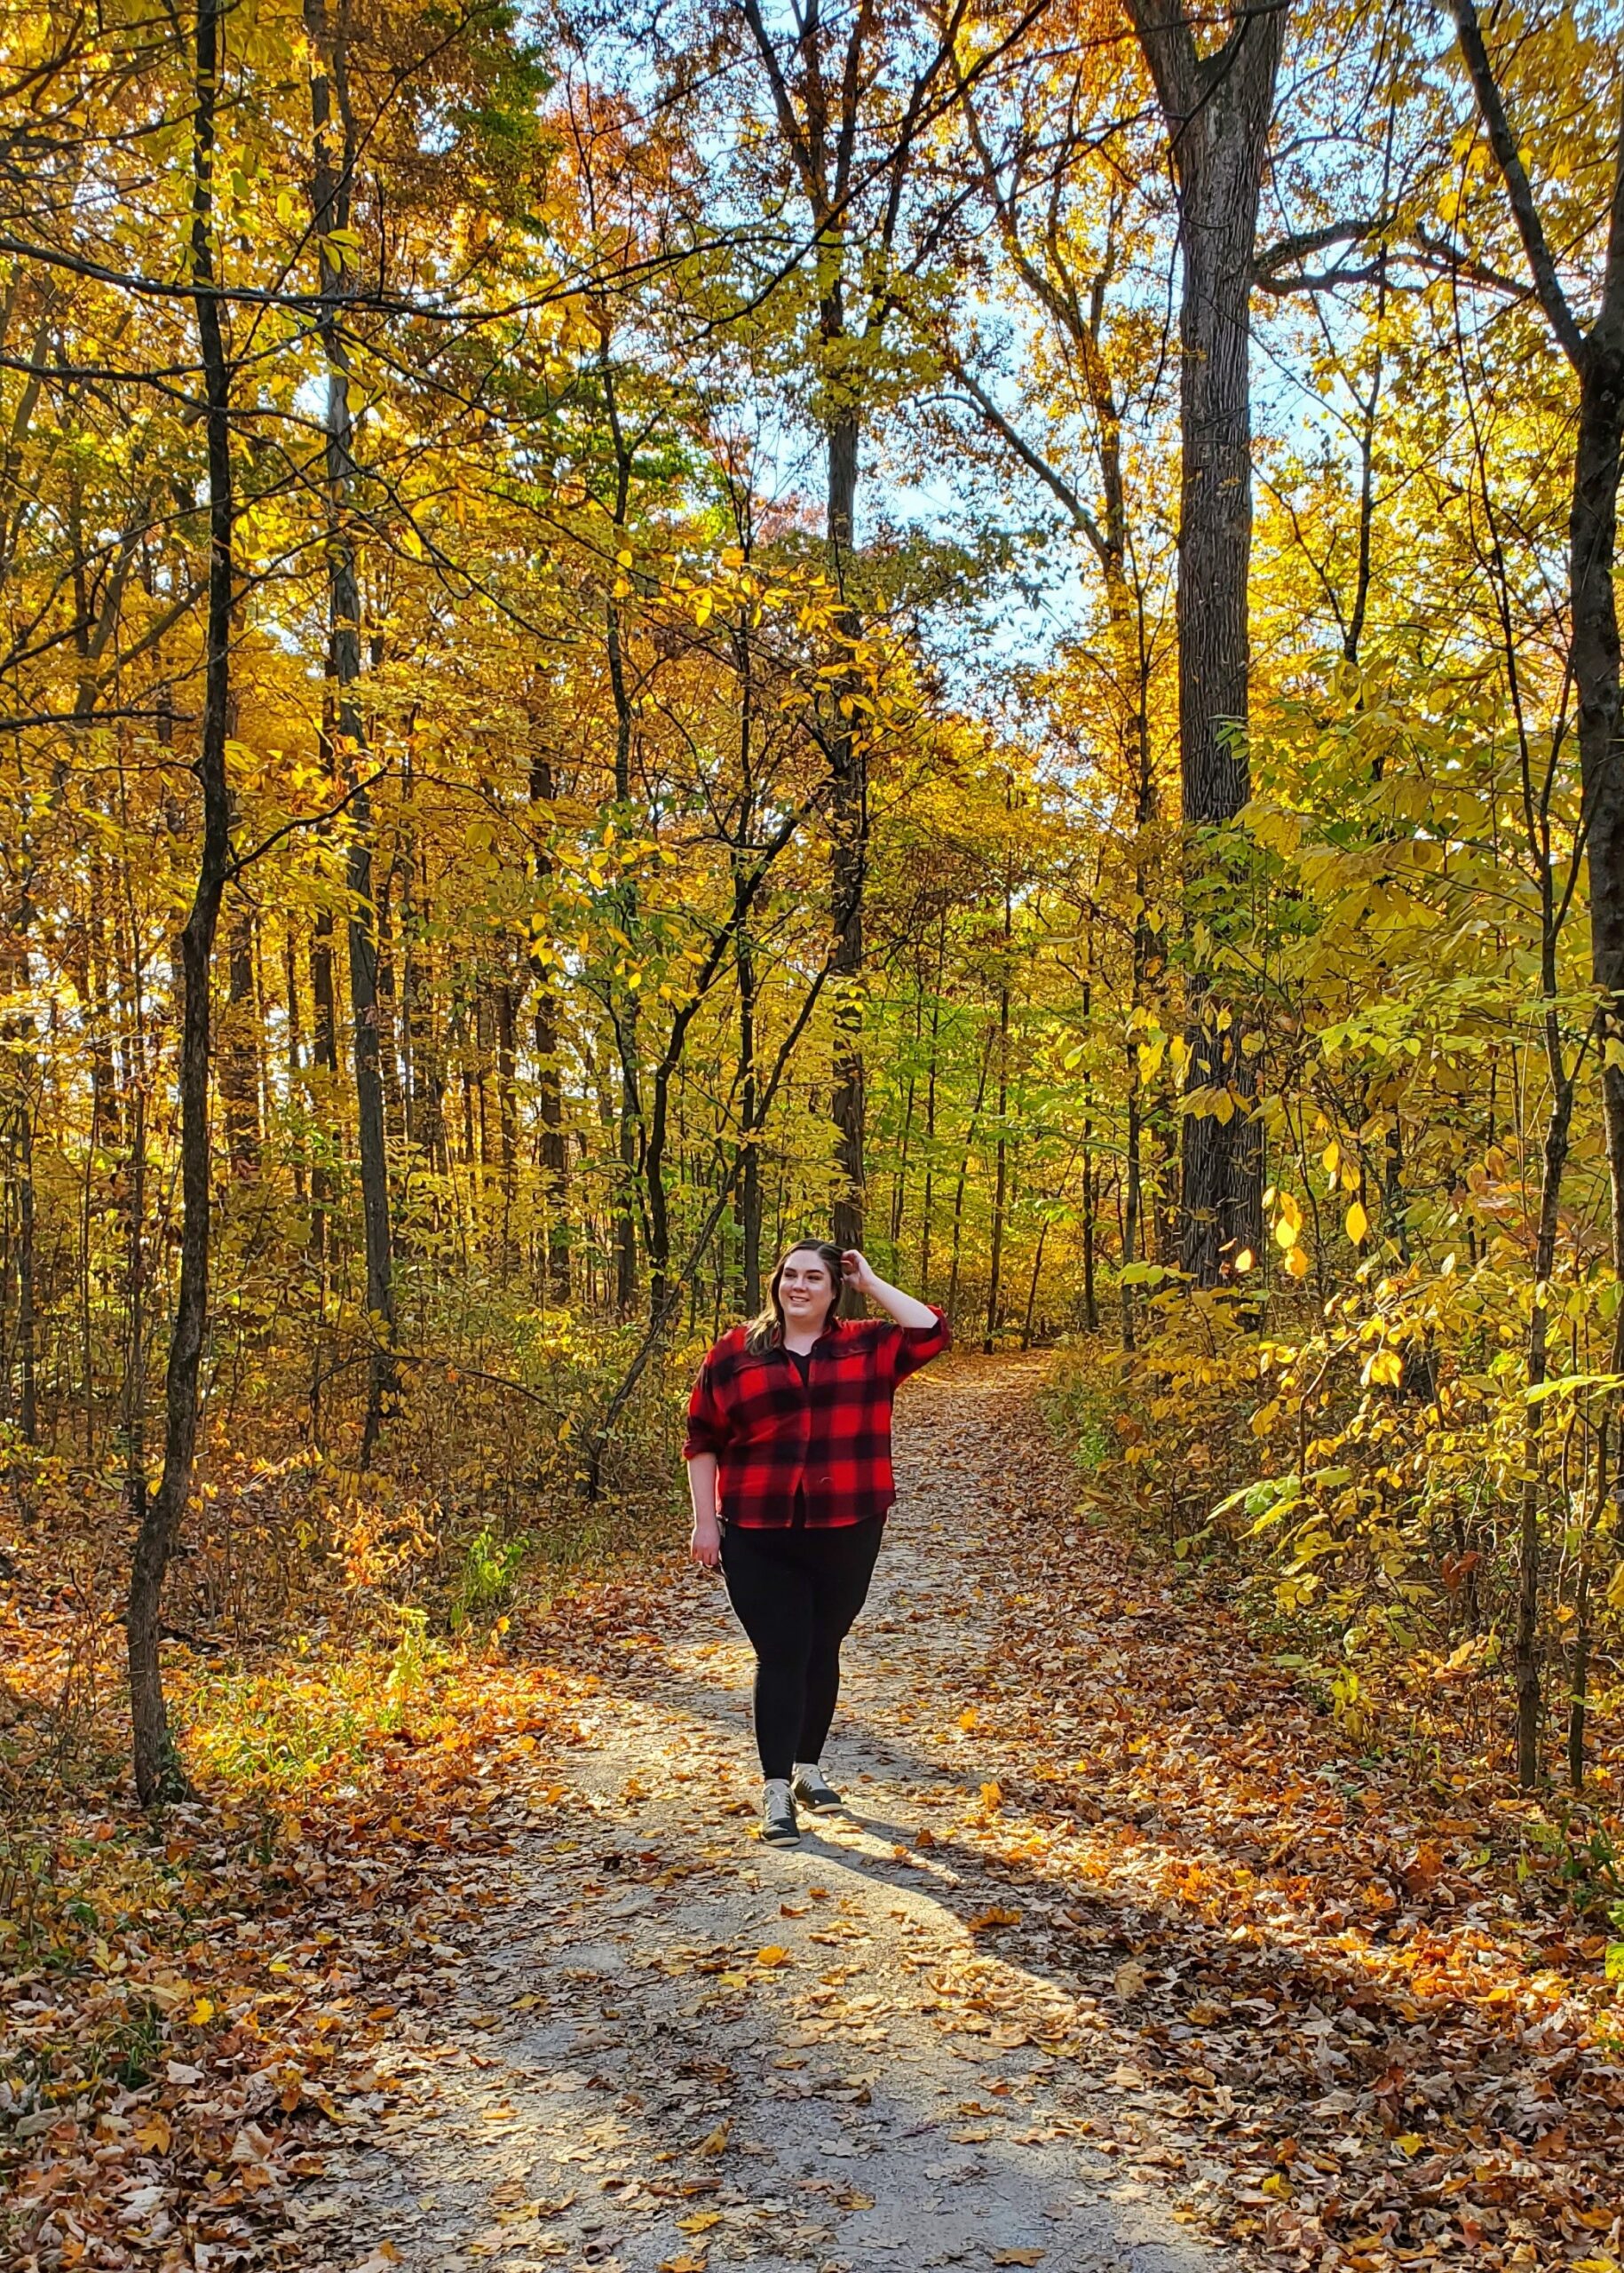 the author in a fat body enjoying a fall hike